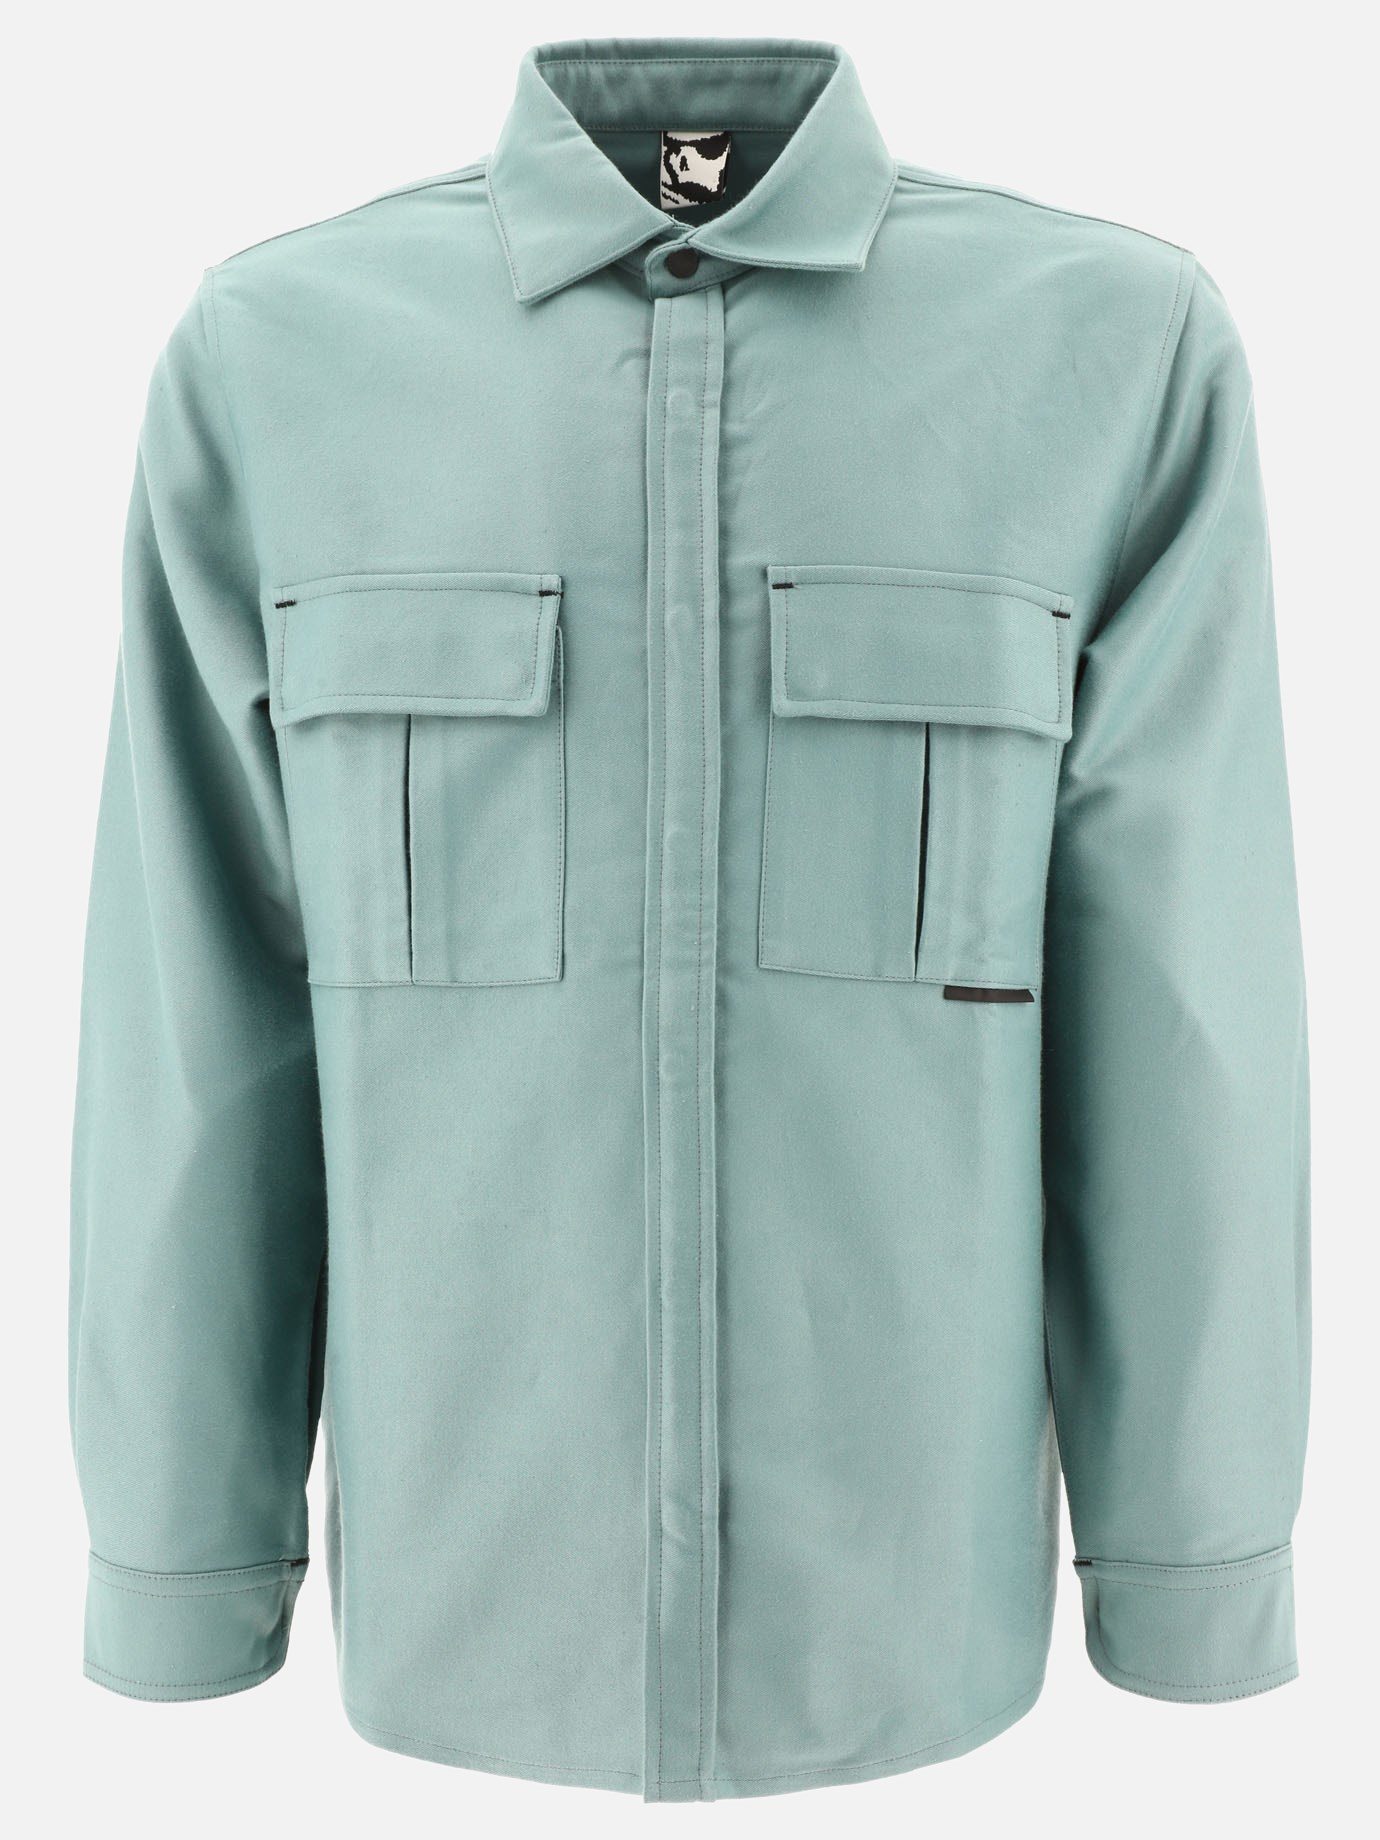 Overshirt  Replicated Bold Fustain by Gr10K - 2